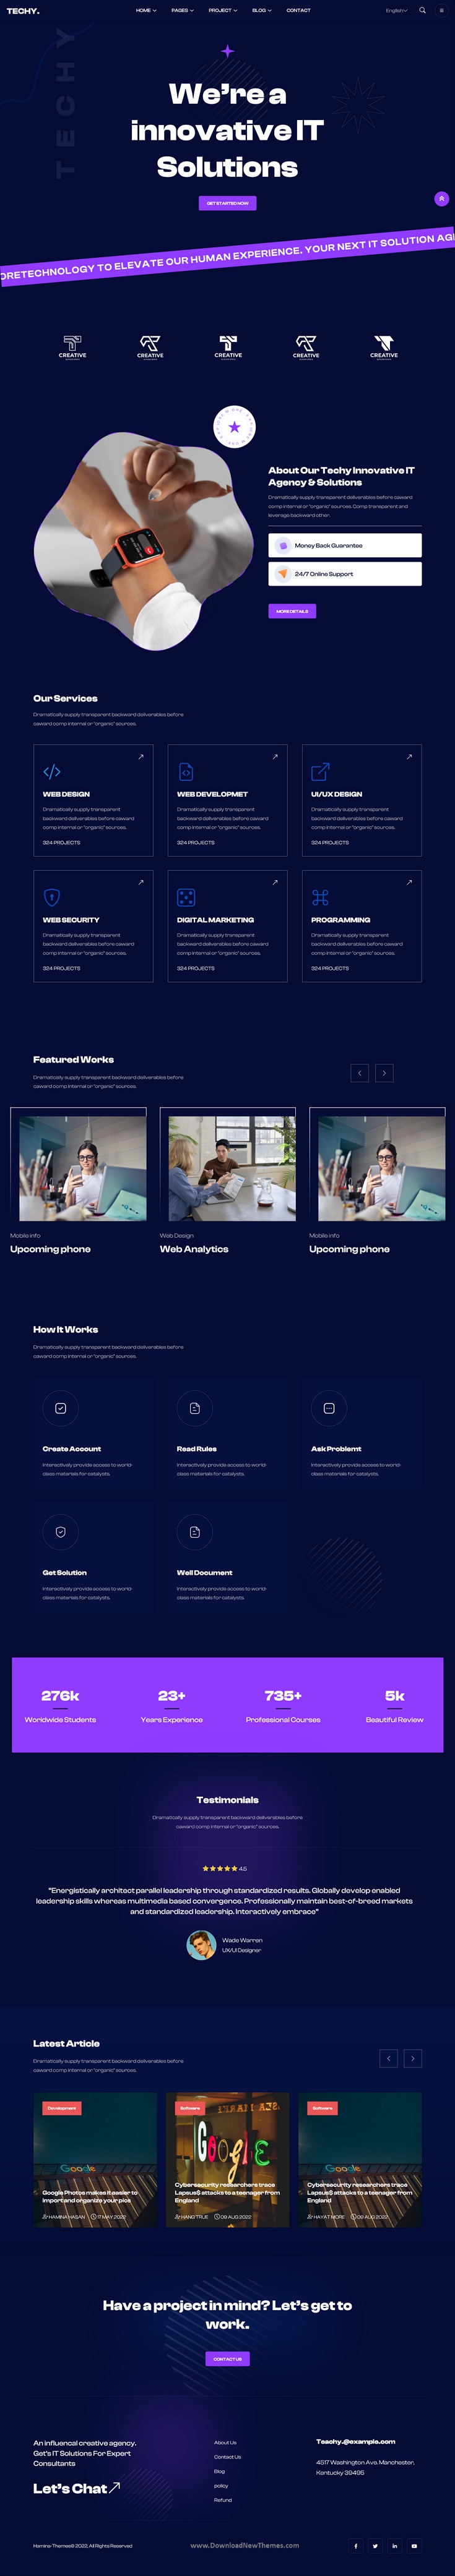 Techy – IT Solution & Web Security React Template Review